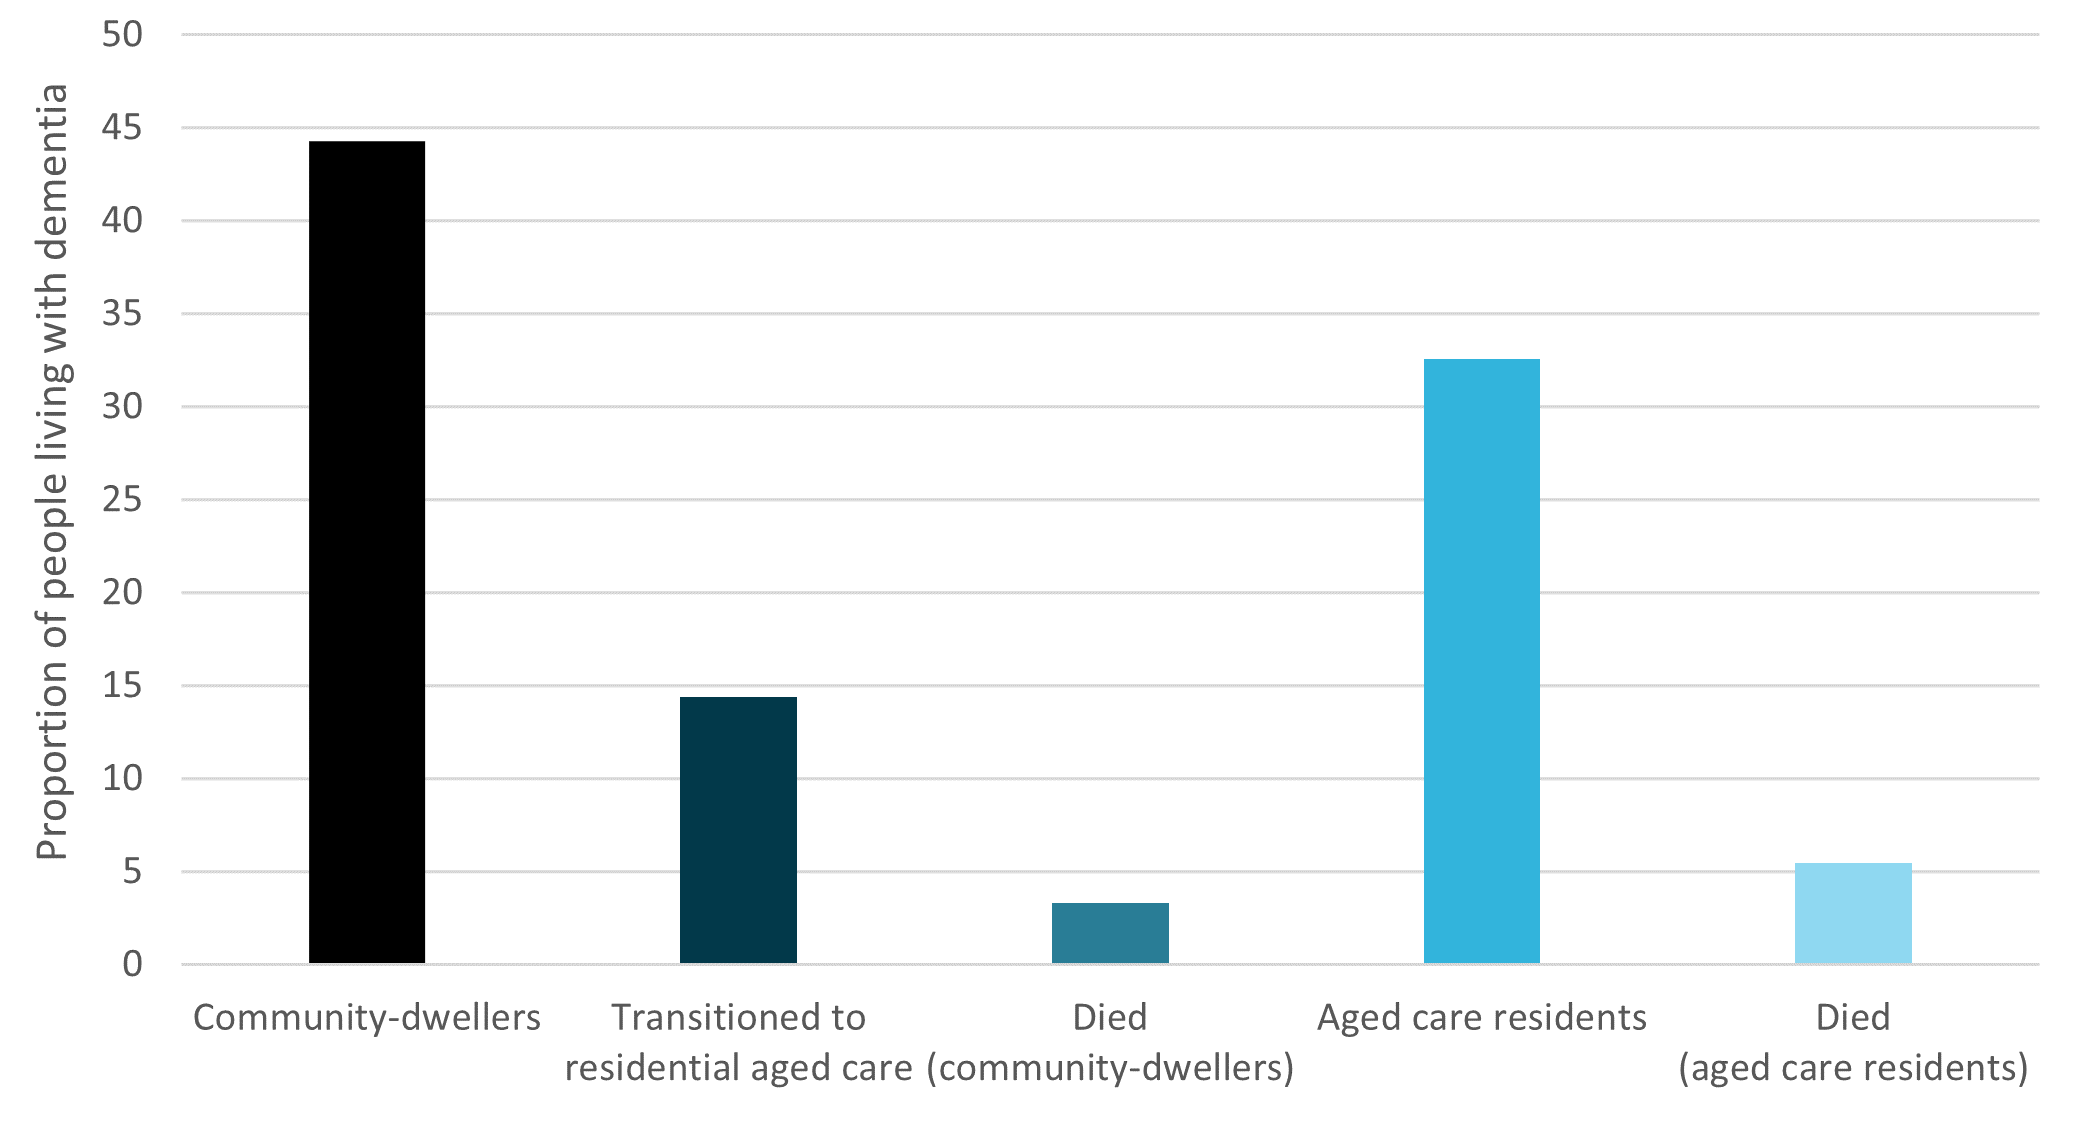 The figure is a bar chart and shows that most people living with dementia continued to live in the community (44%) or continued to live in aged care (33%), while 14% of people transitioned from living in the community to living in aged care, and 8% of people living with dementia died during their hospitalisation or within 7-days of discharge.